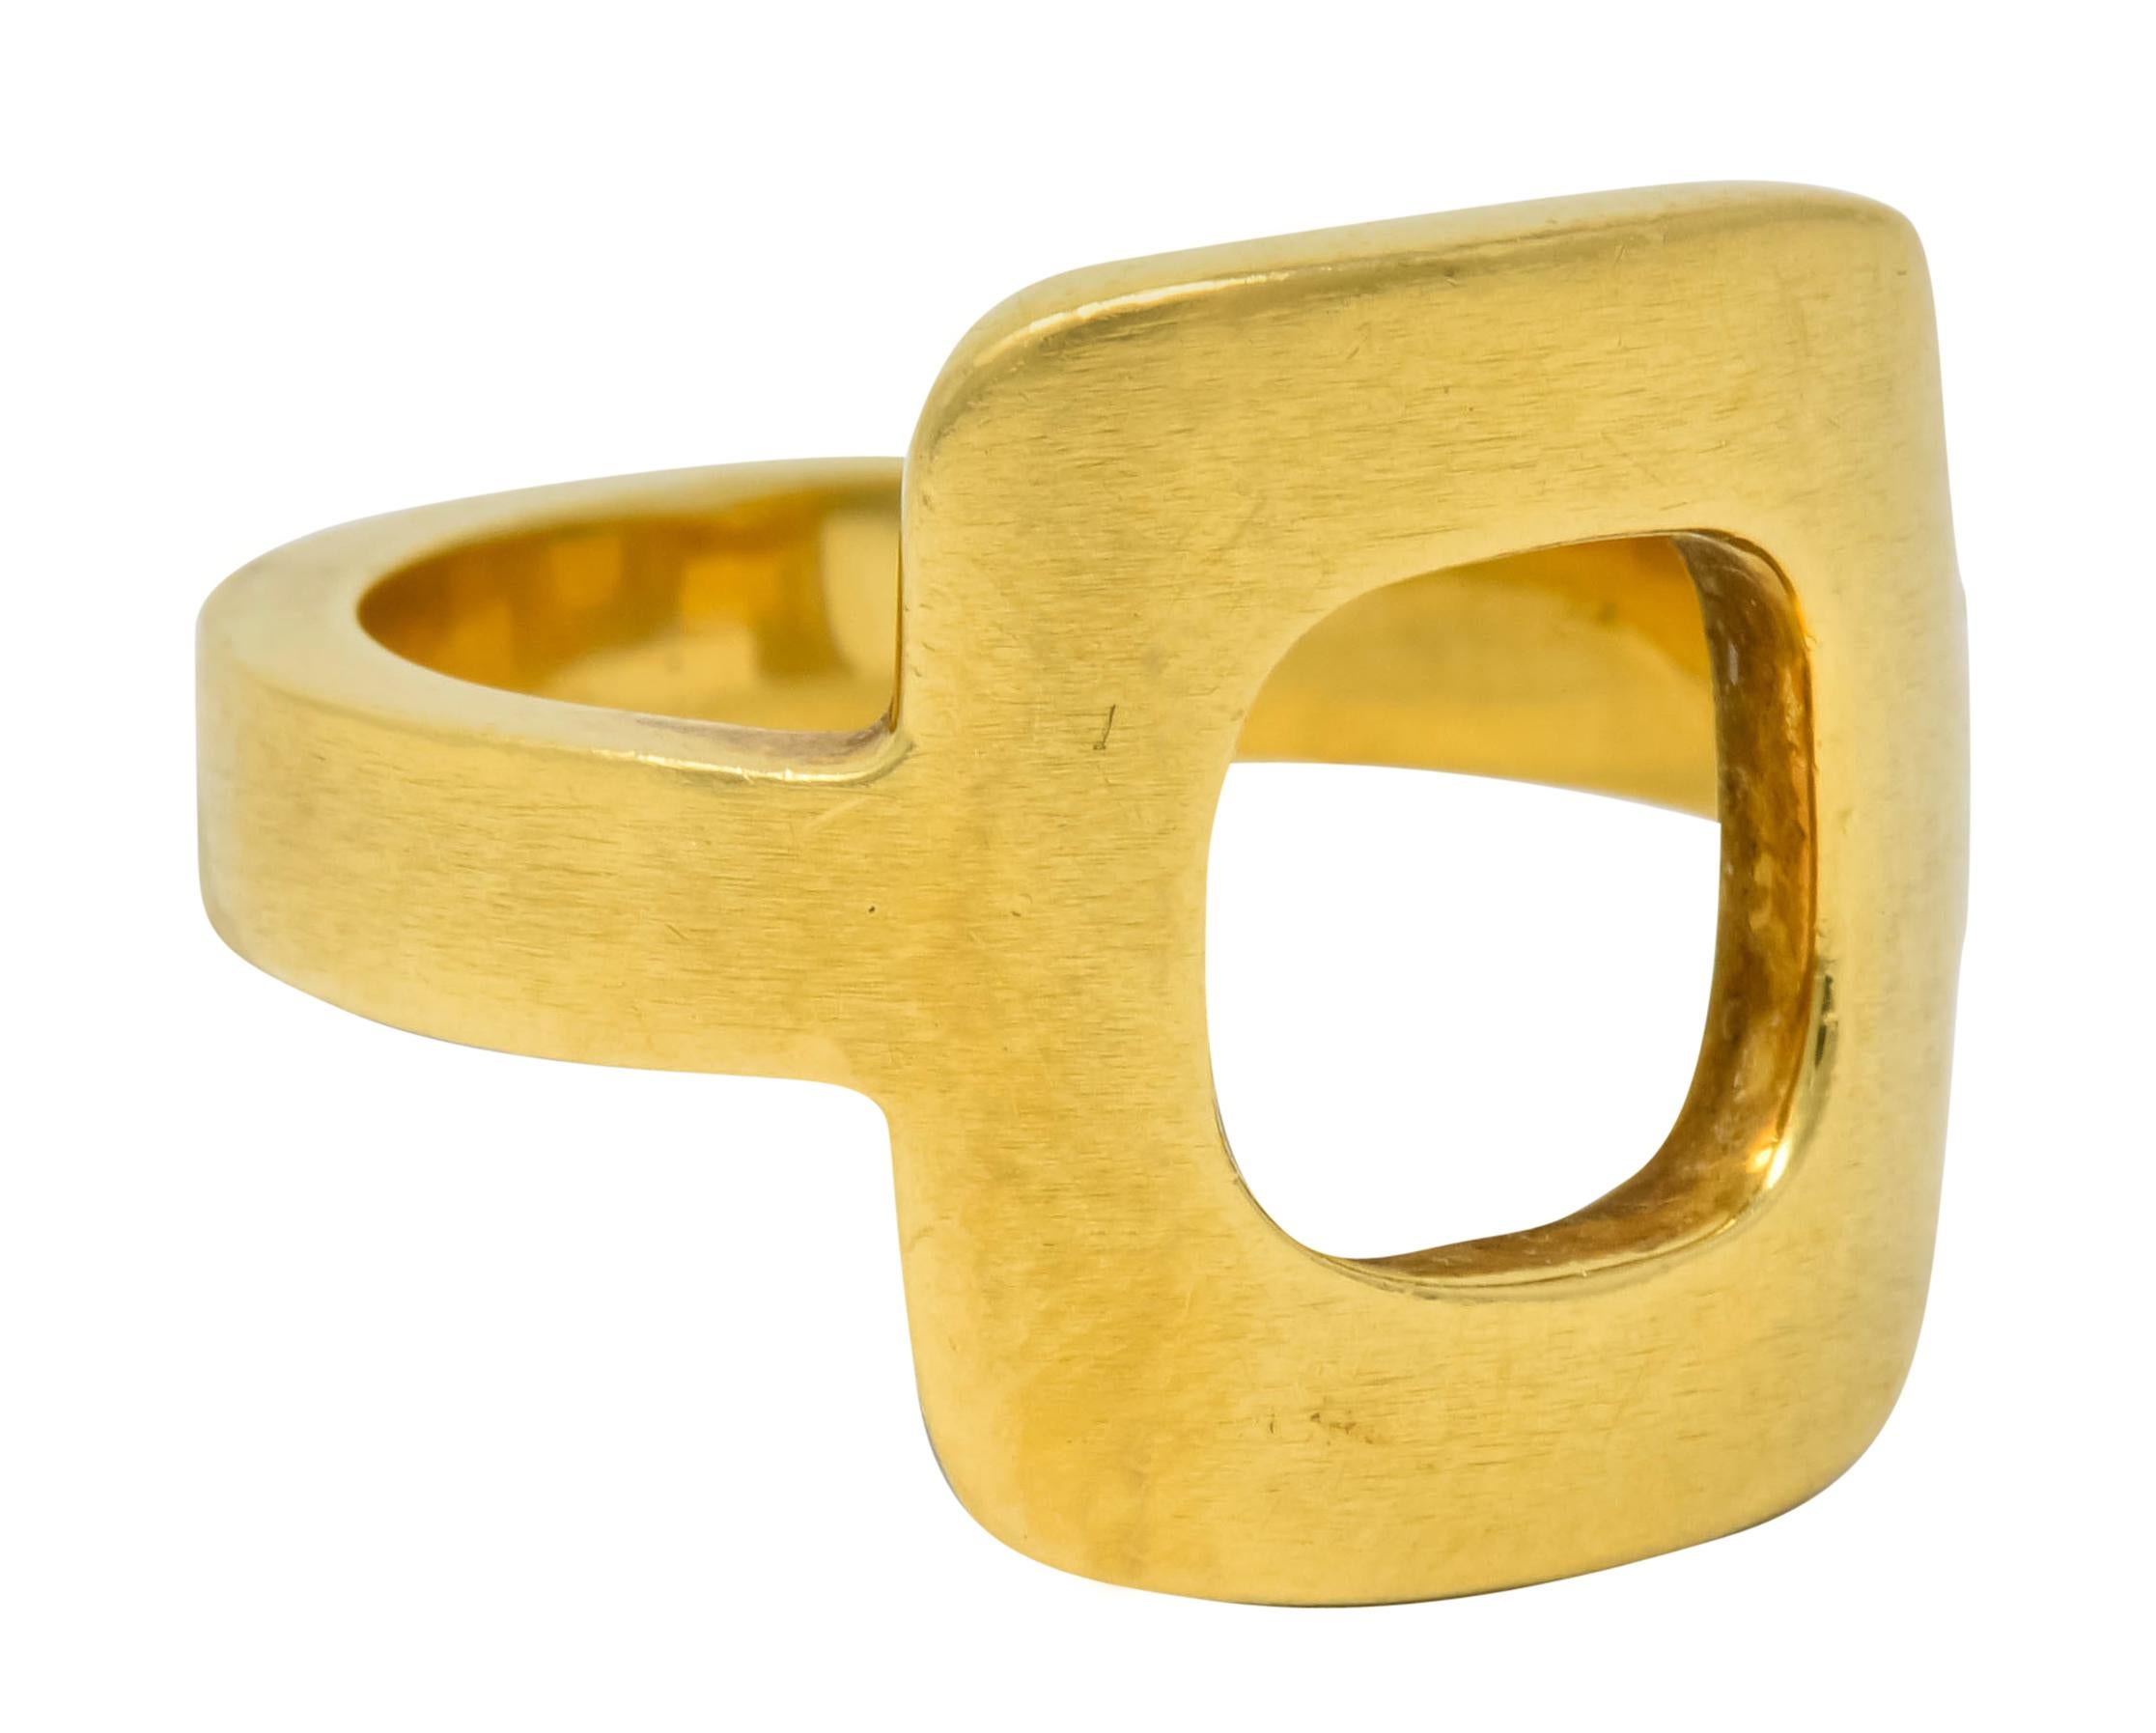 Ring designed as cushioned square with a pierced out center

Features a subtle satin finish

Fully signed Dinh Van, Cartier, and numbered

Stamped 18K for 18 karat gold

Circa: 1960s

Ring Size: 6 & sizable

Top measures: 15.7 mm and sits 2.3 mm